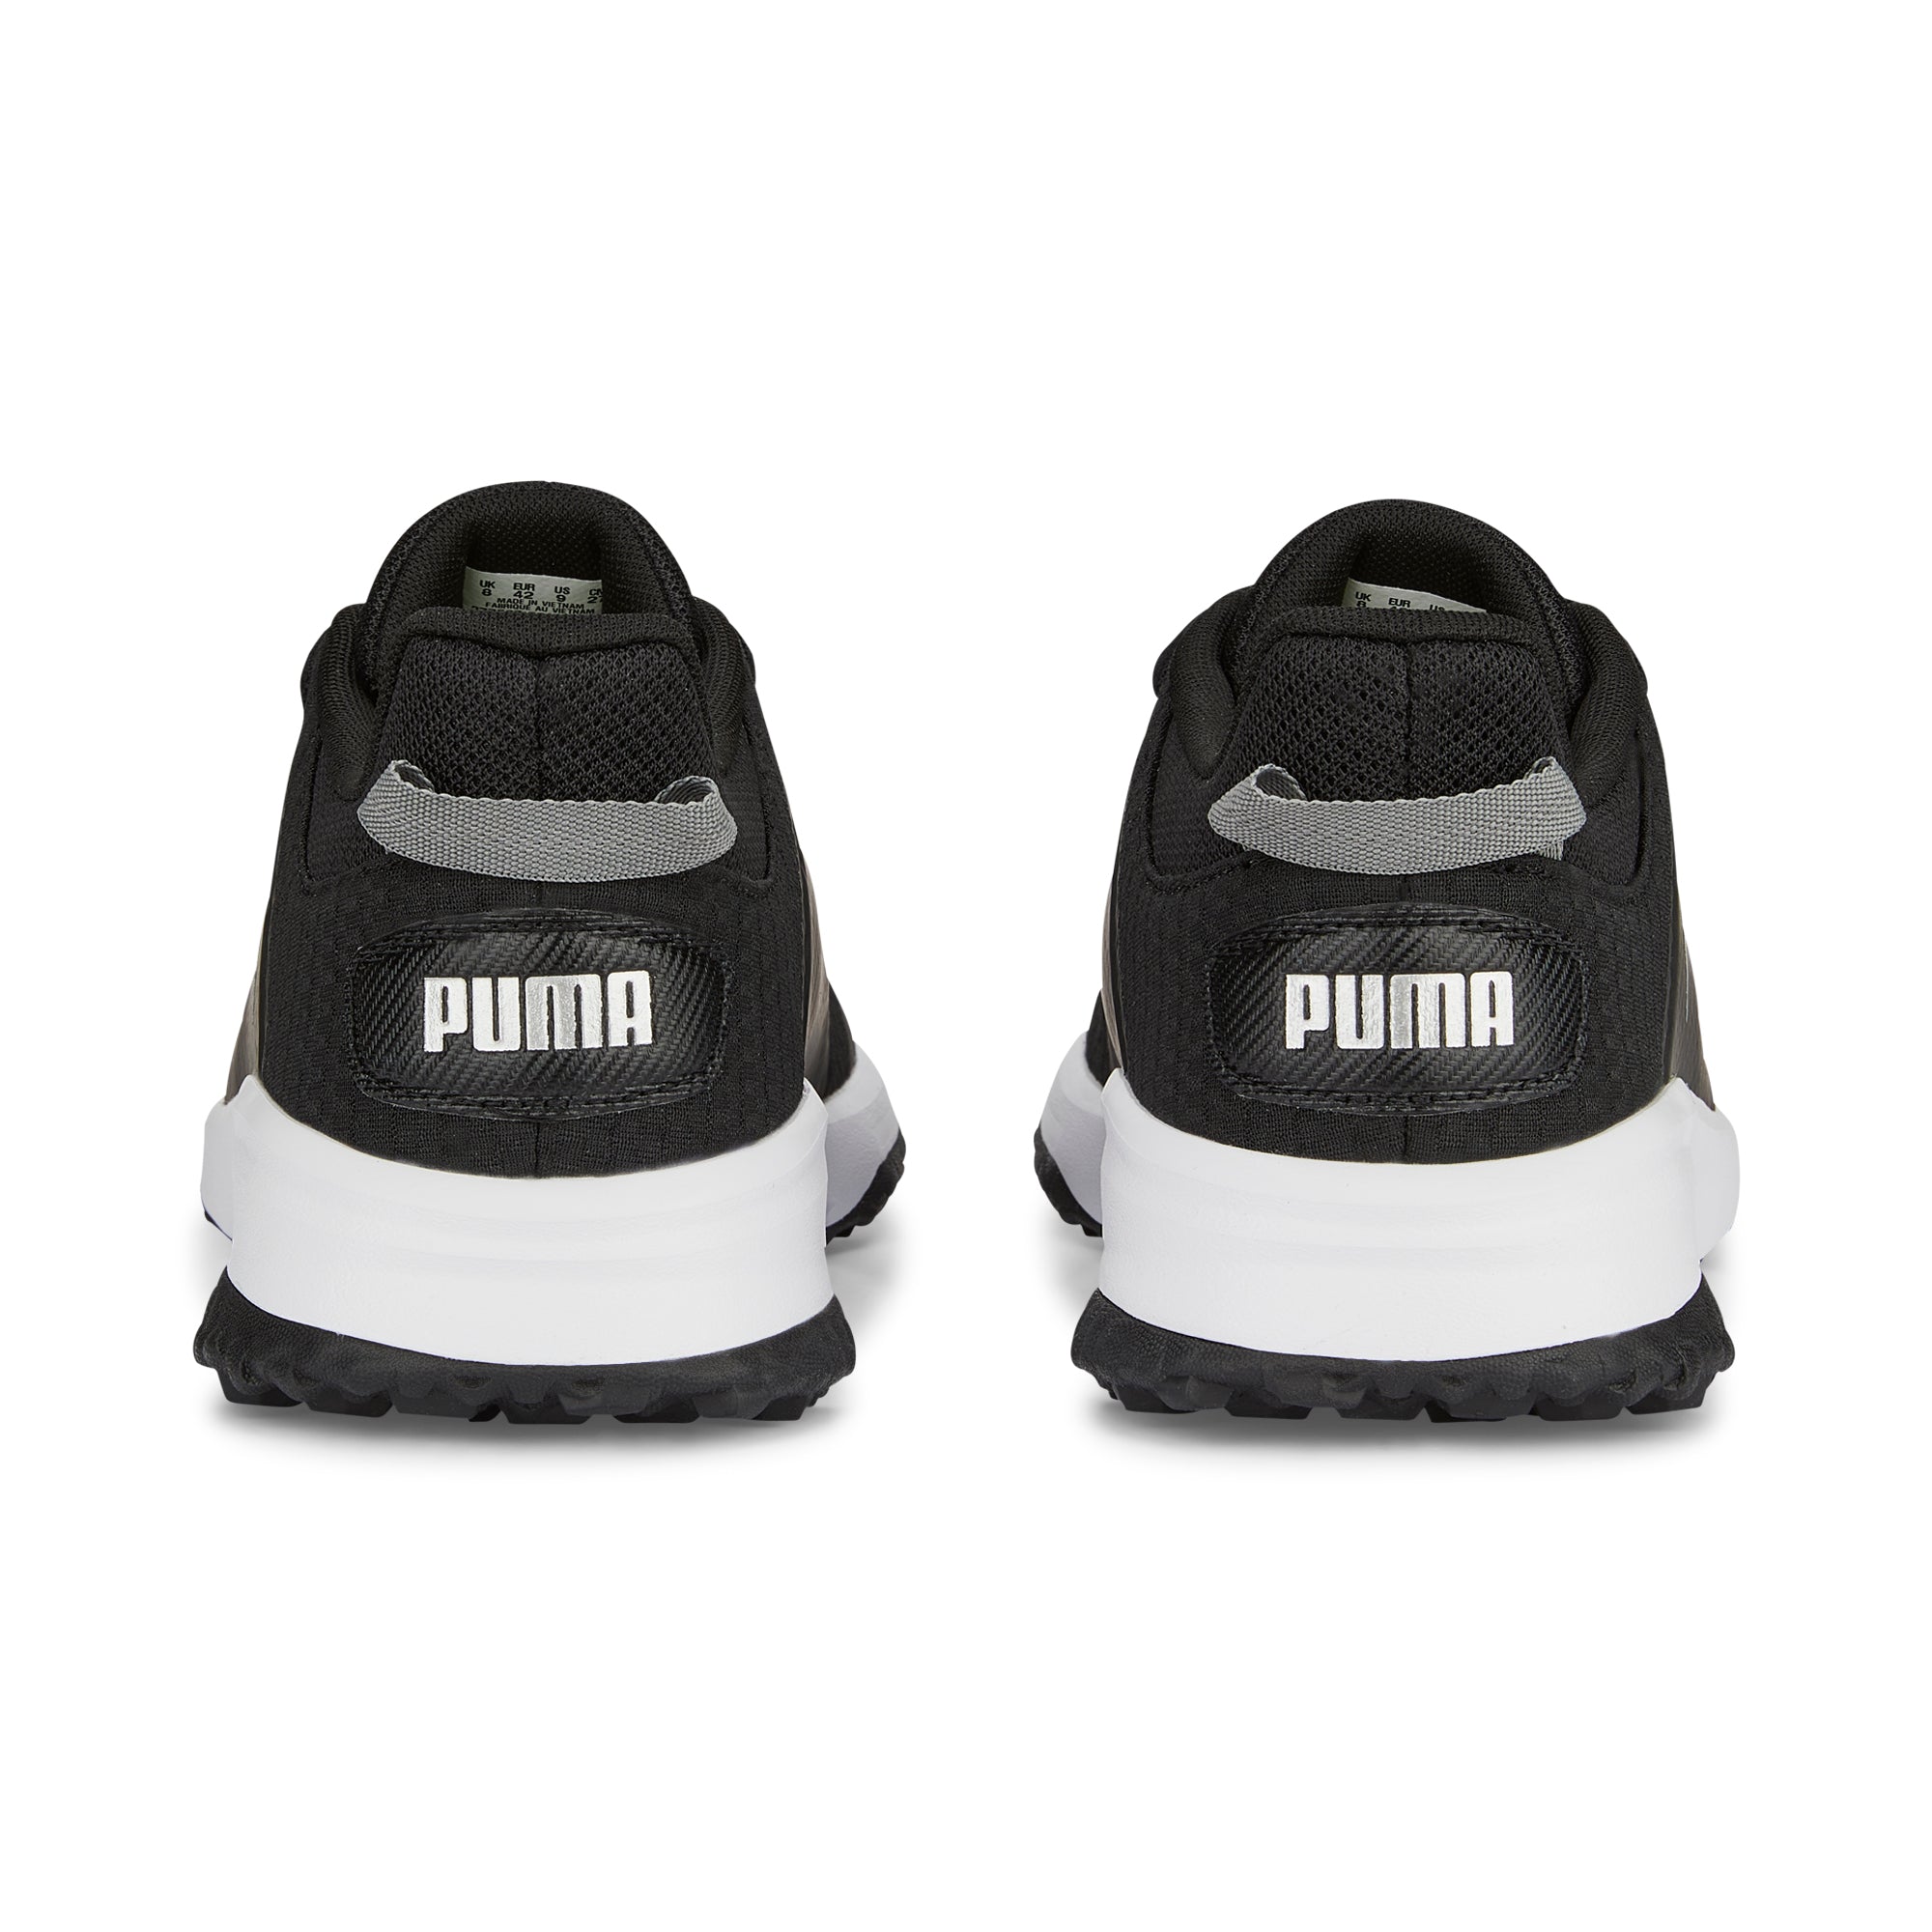 FUSION GRIP Spikeless Golf Shoes